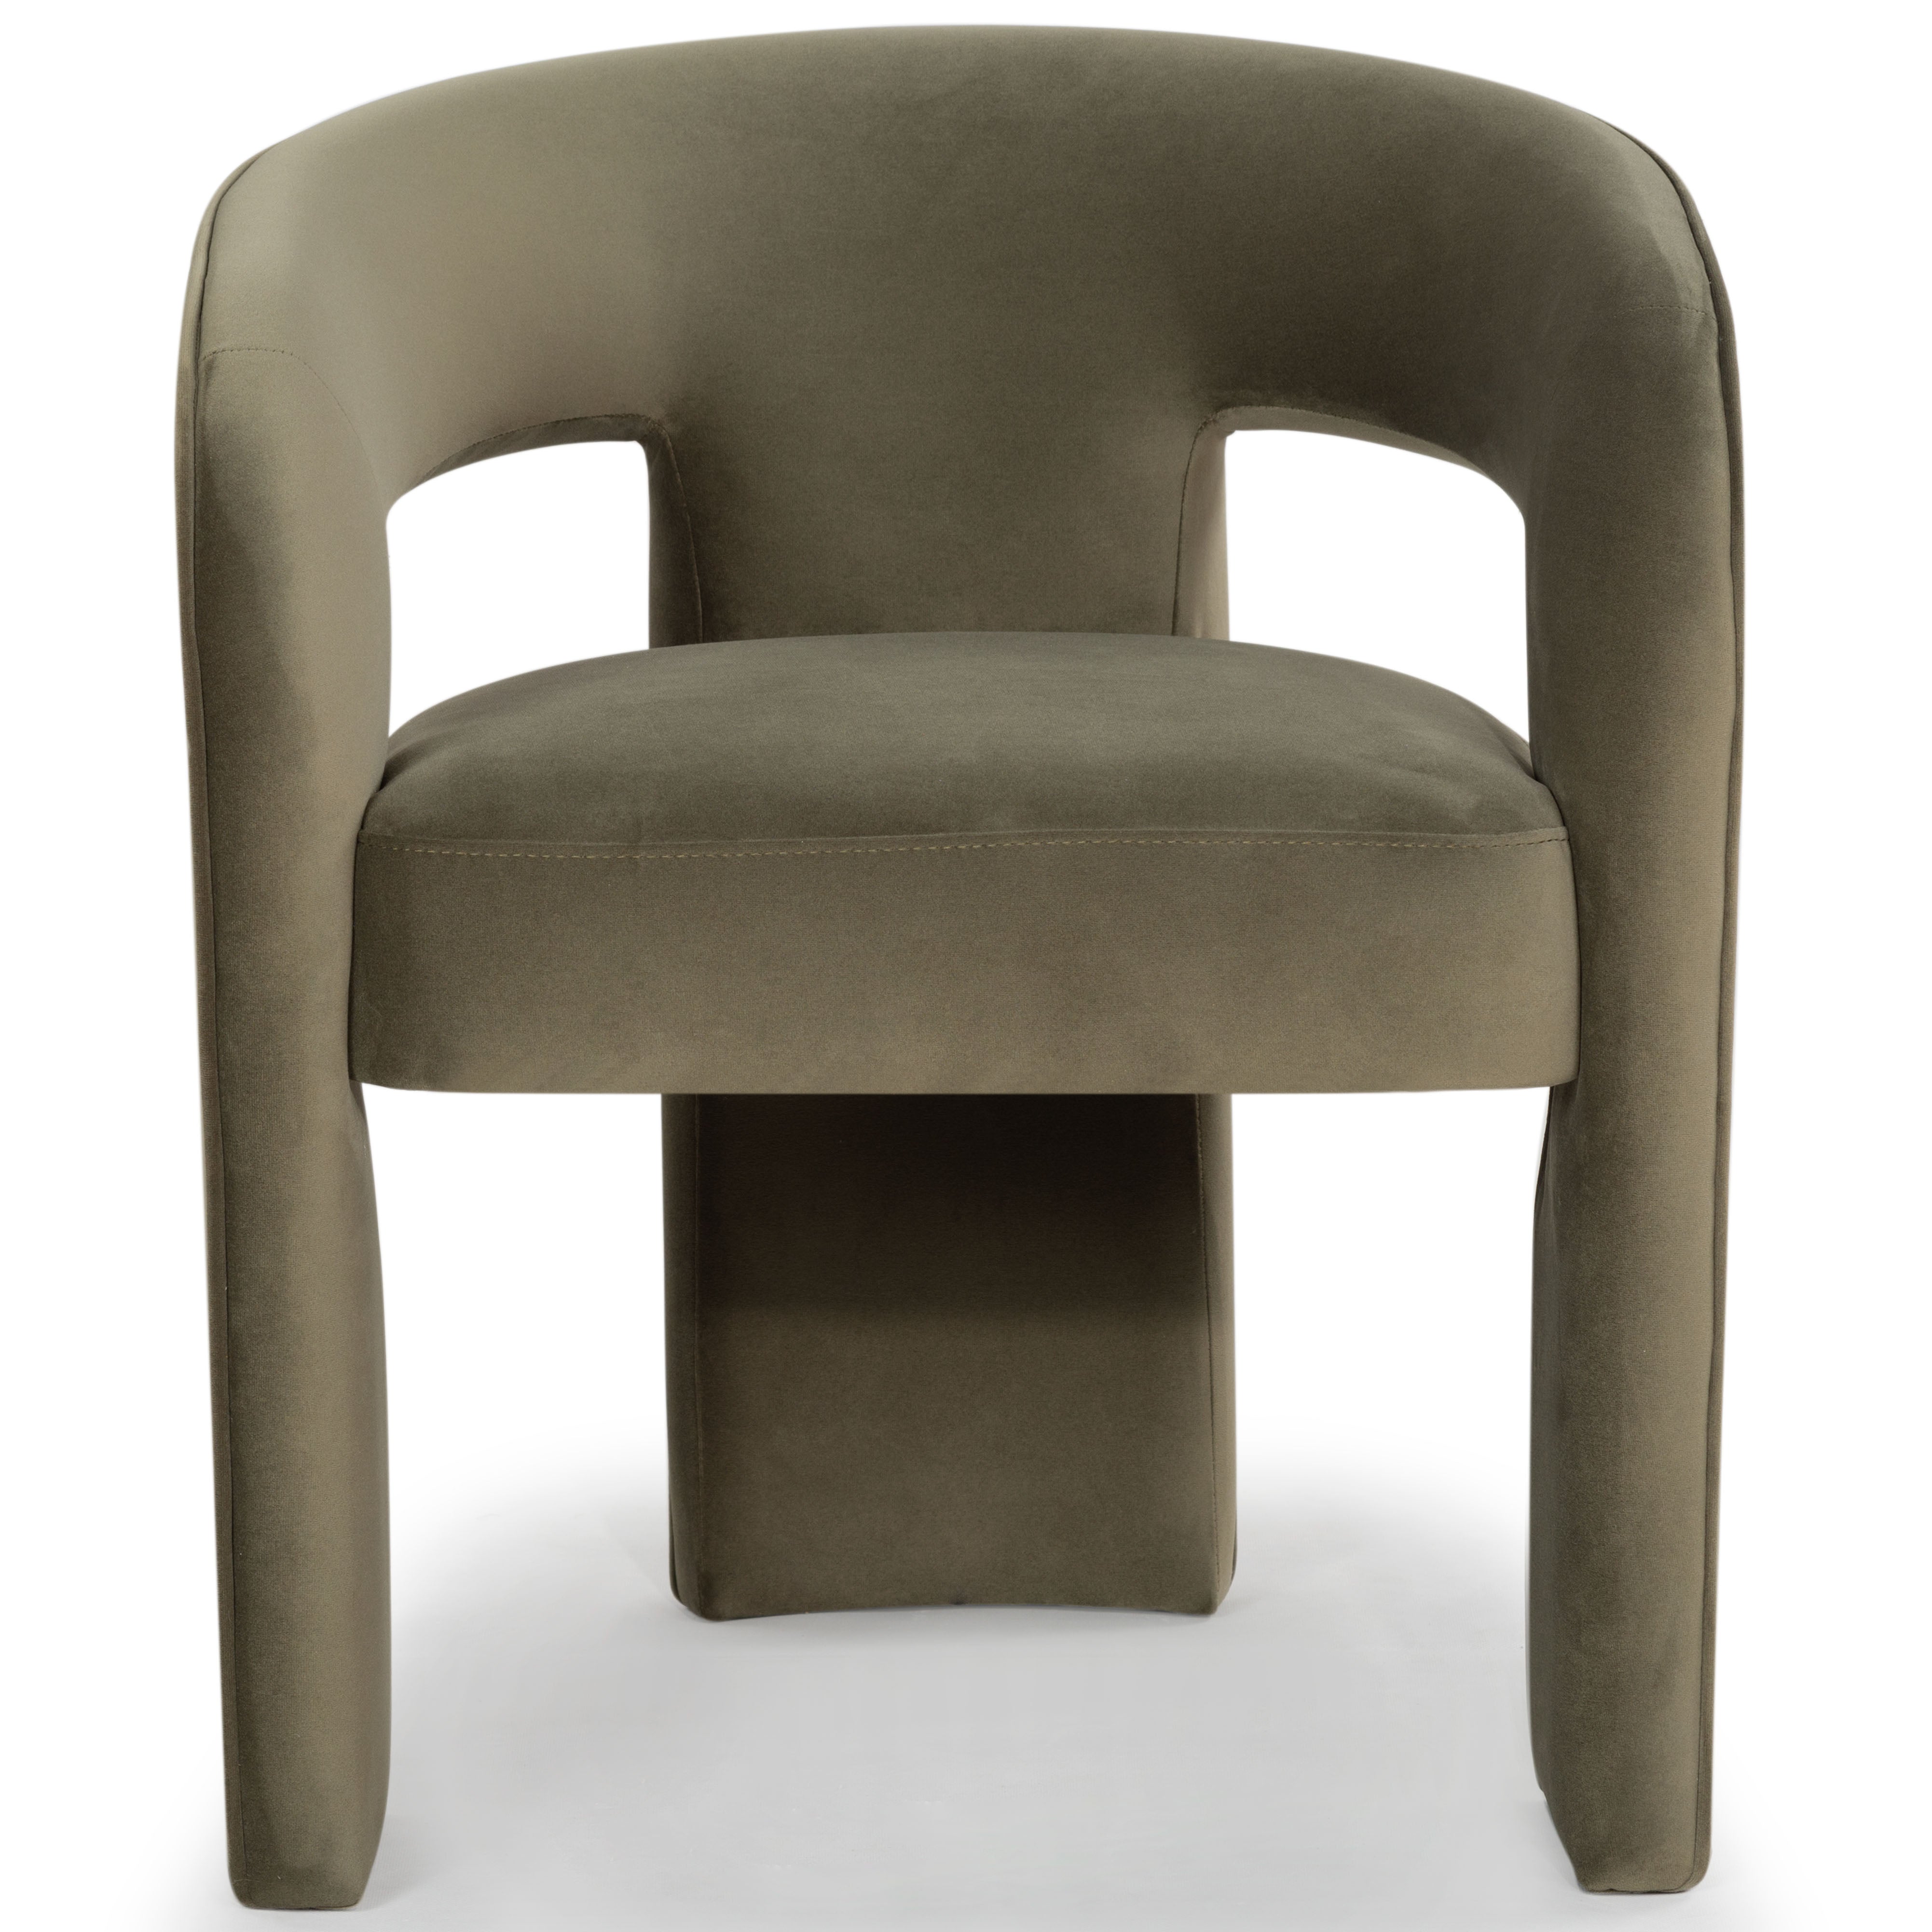 Safavieh Couture Catharia 3 Leg Dining Chair, SFV4602 - Olive Green